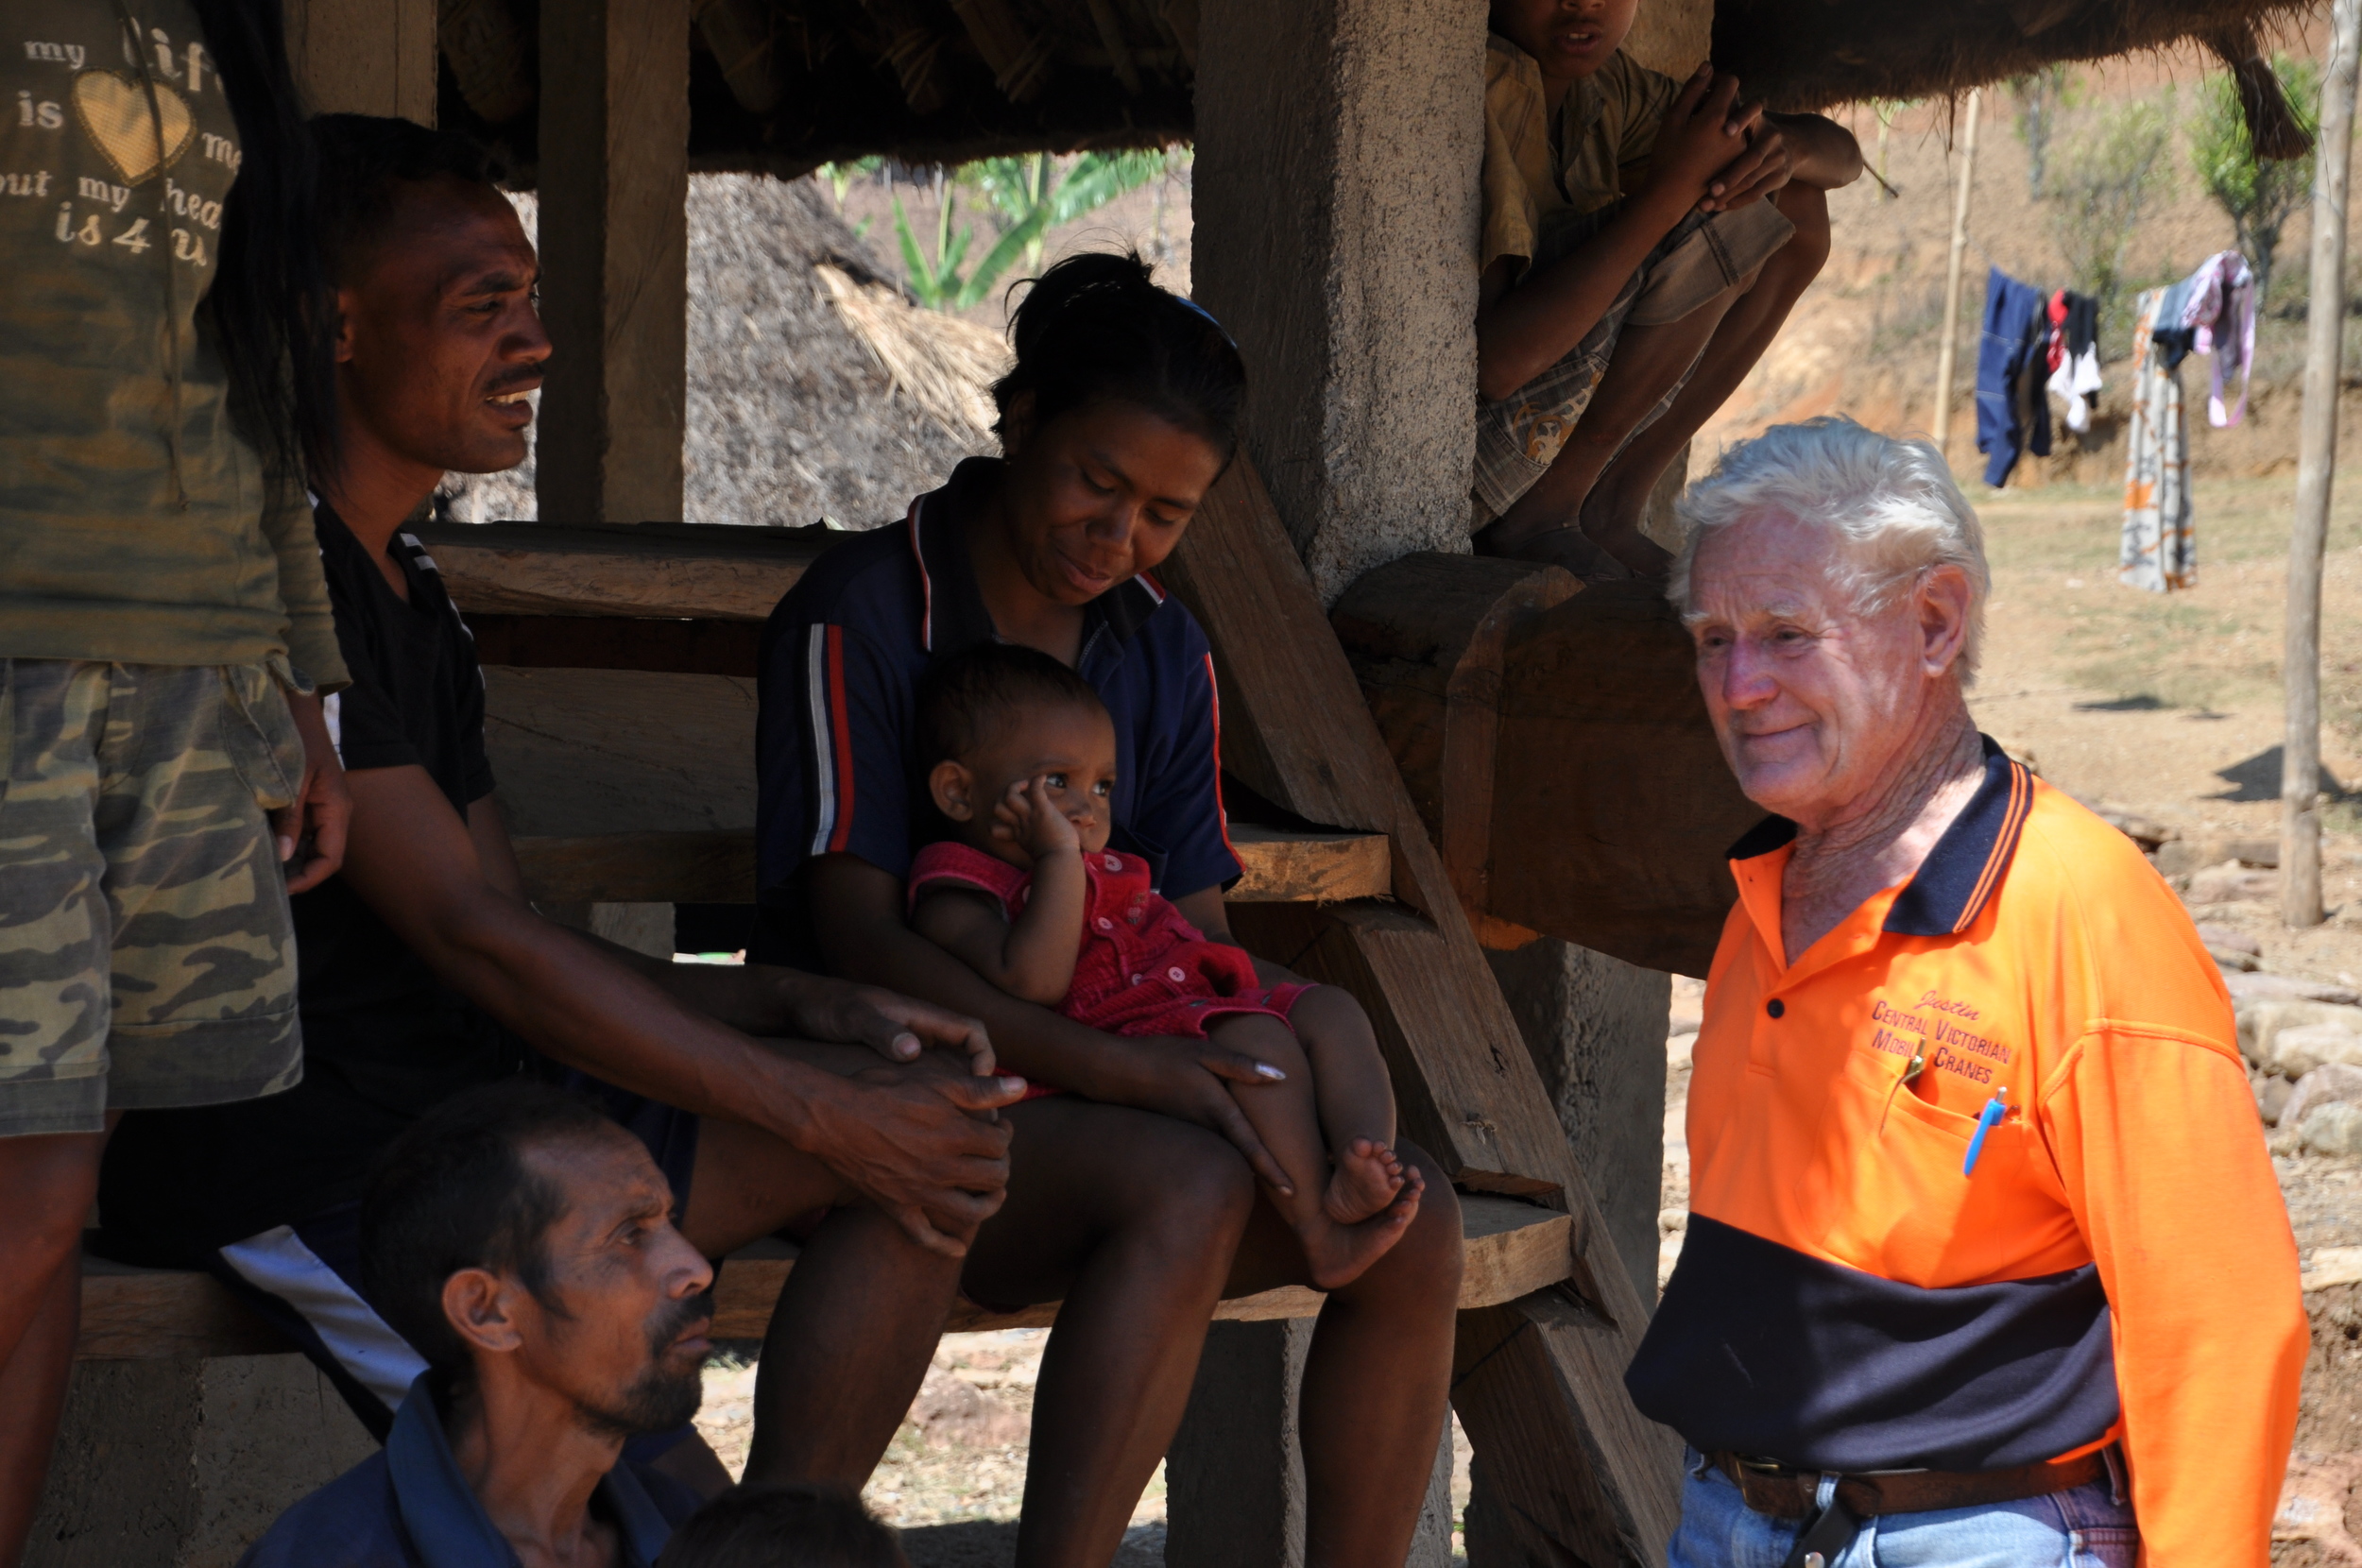 Ivan Smith, from Rotary Australia, is one of a team of volunteers helping to re-build buildings in remote parts of Timor-Leste